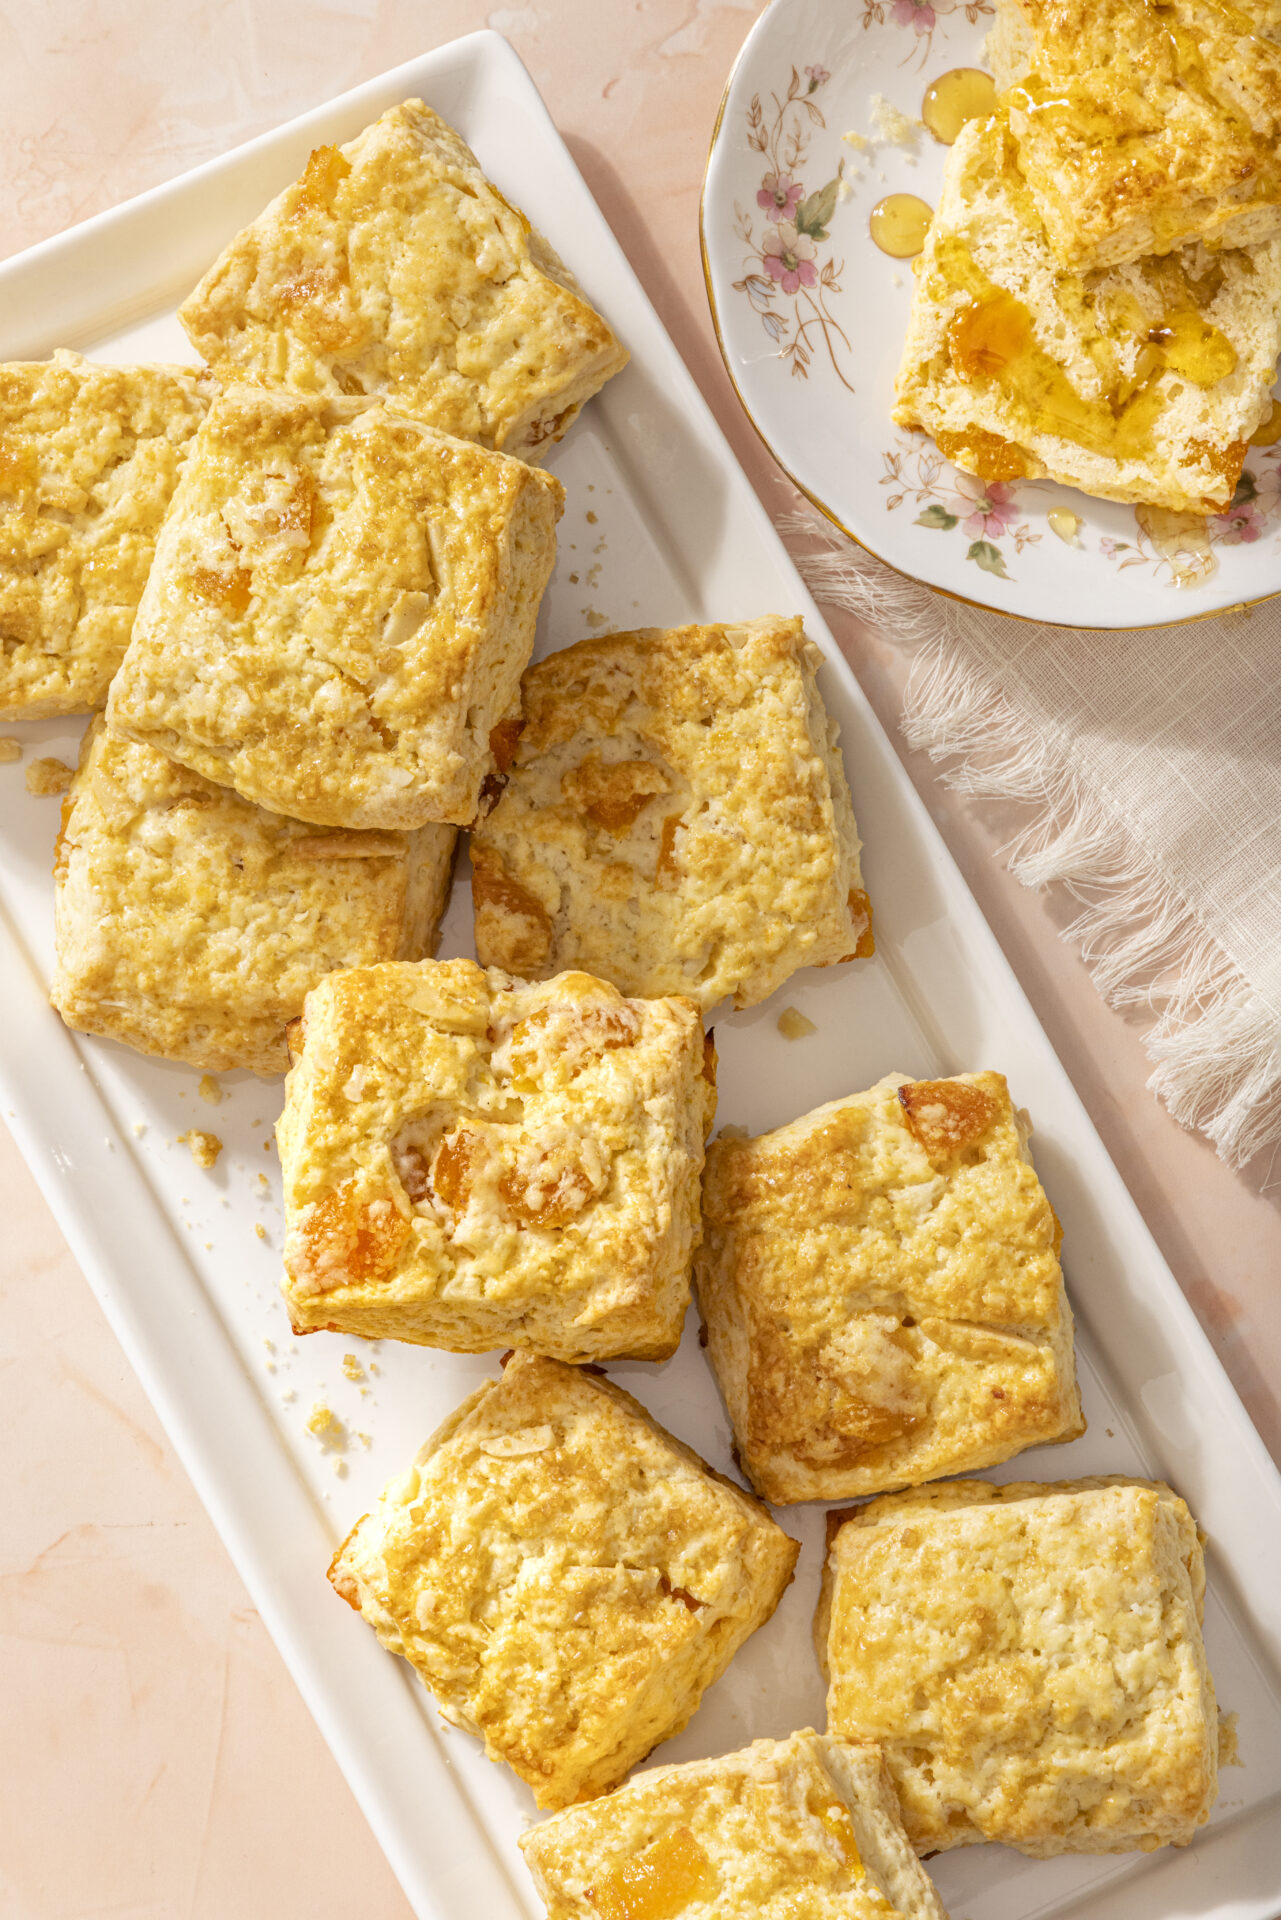 Almond apricot scones on a tray